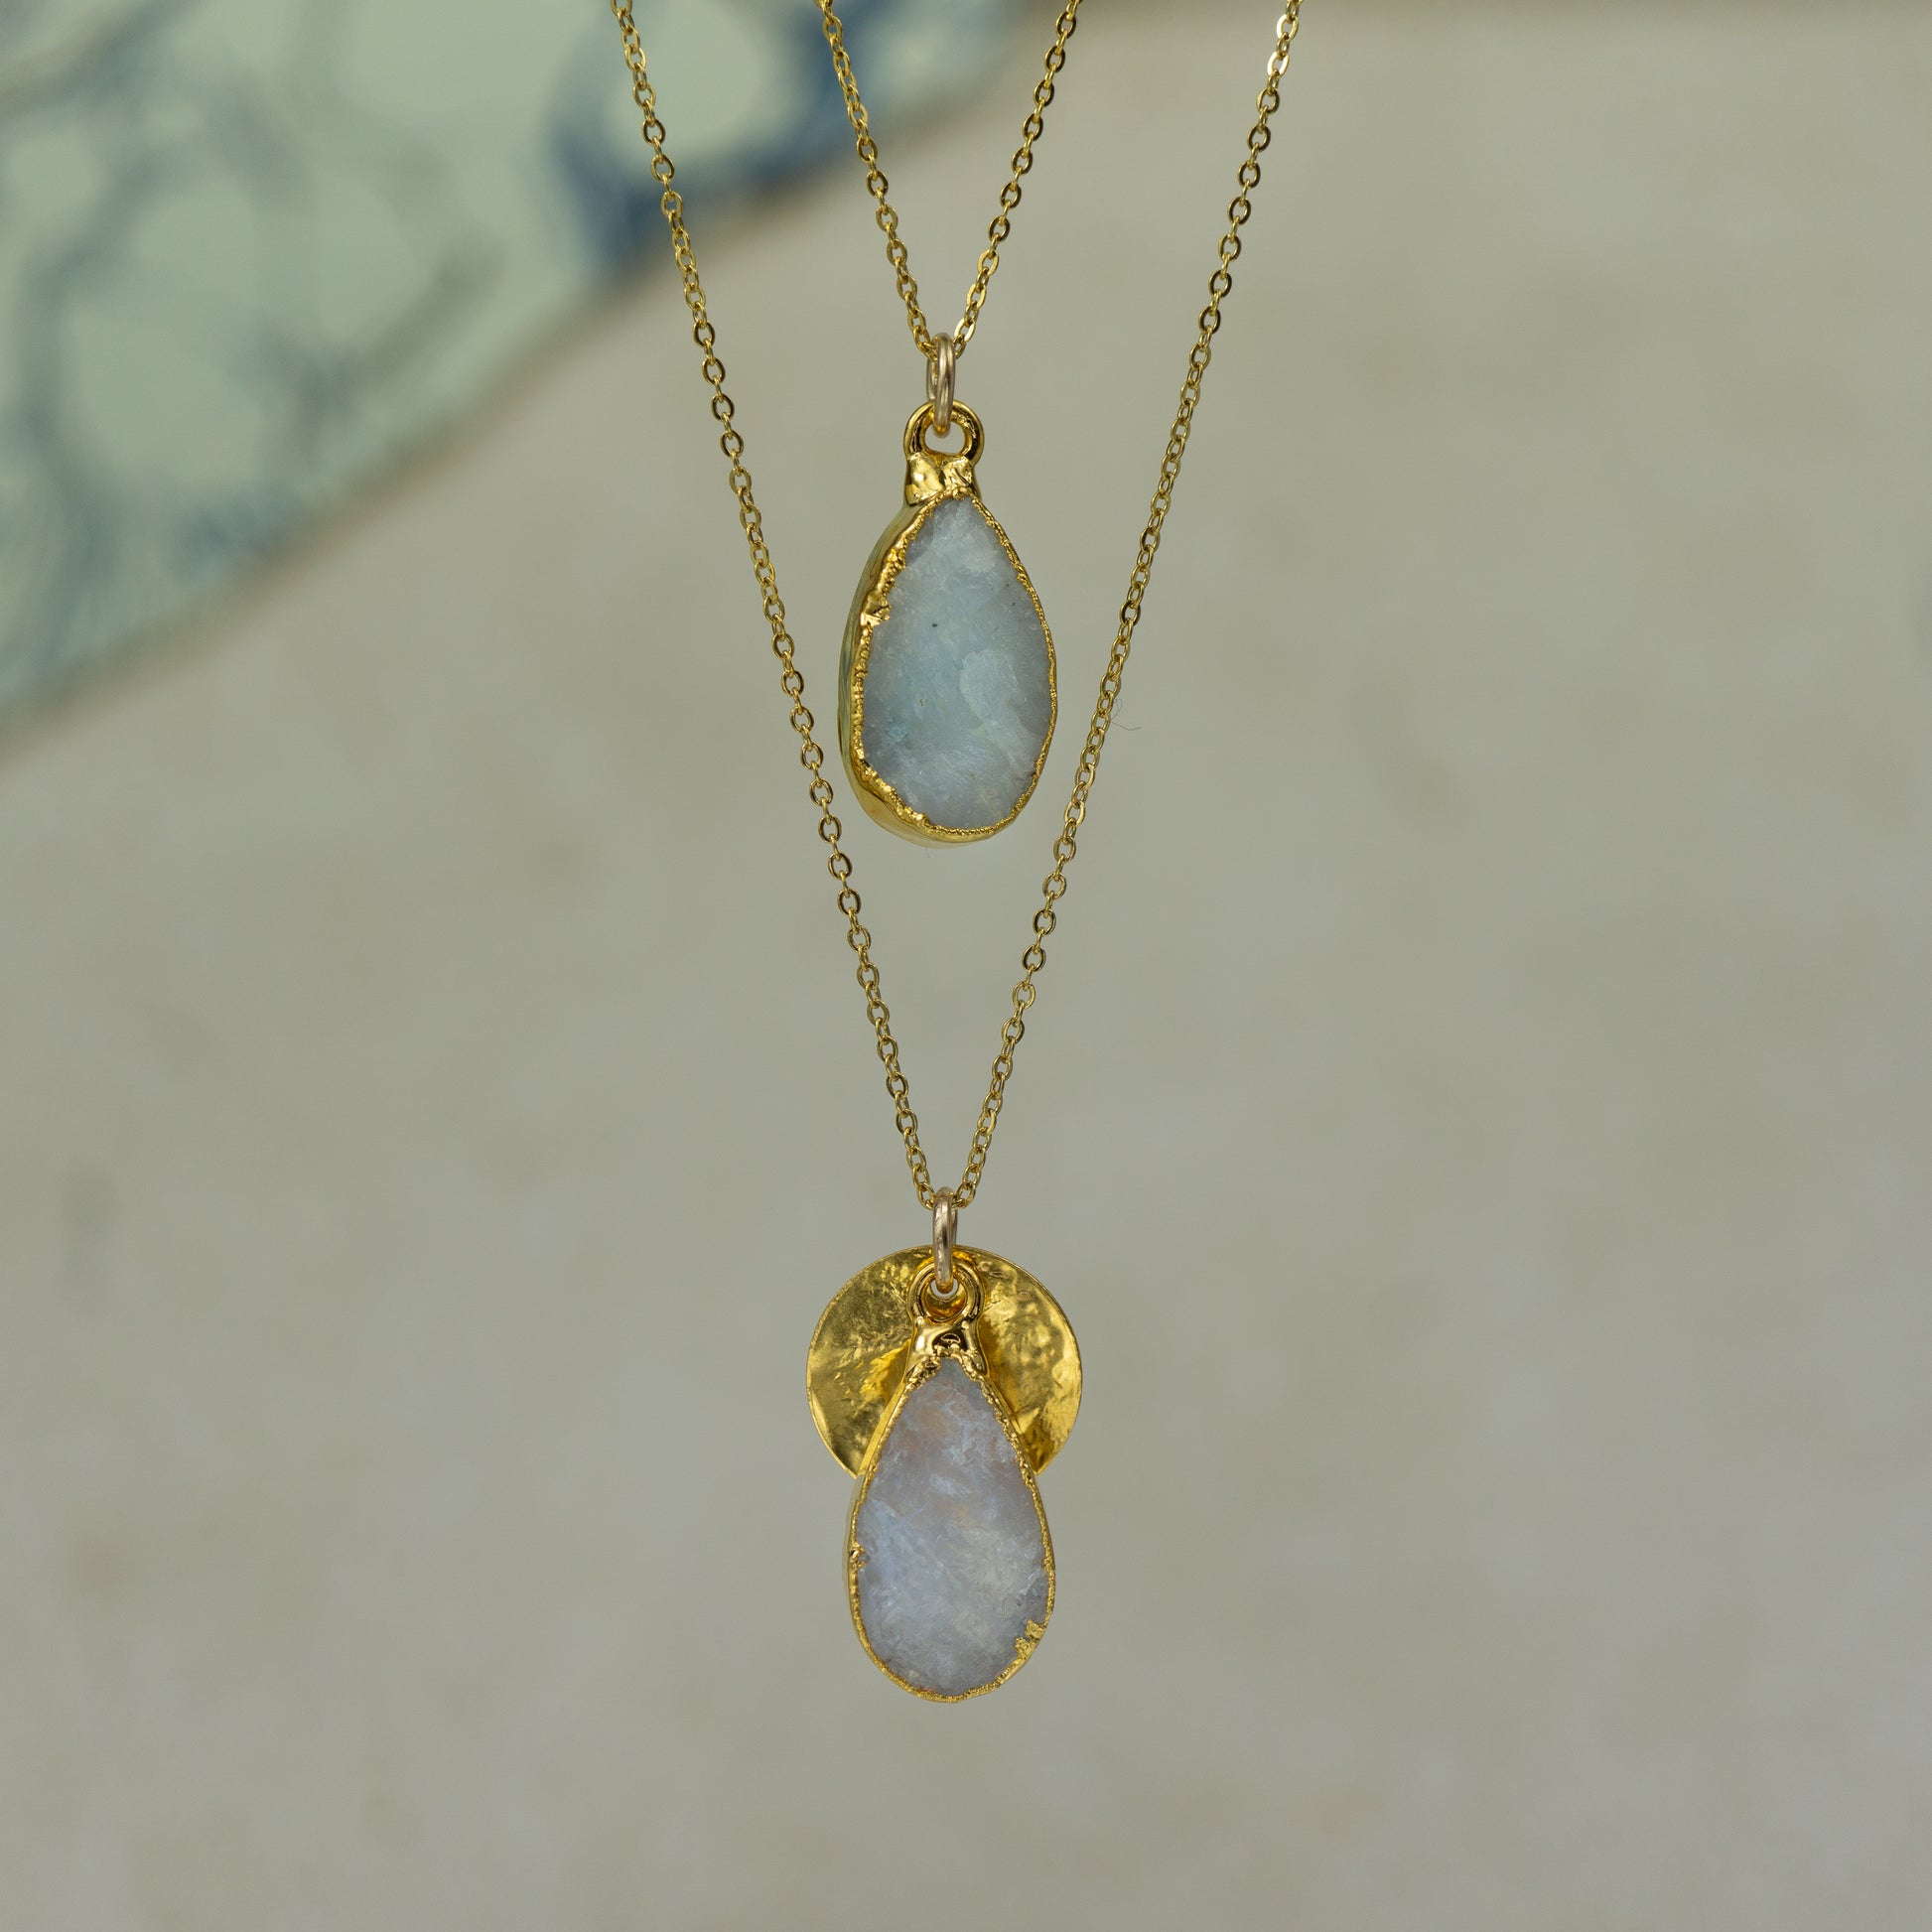 Raw white moonstone teardrop pear shaped pendants finished in gold on a chains.